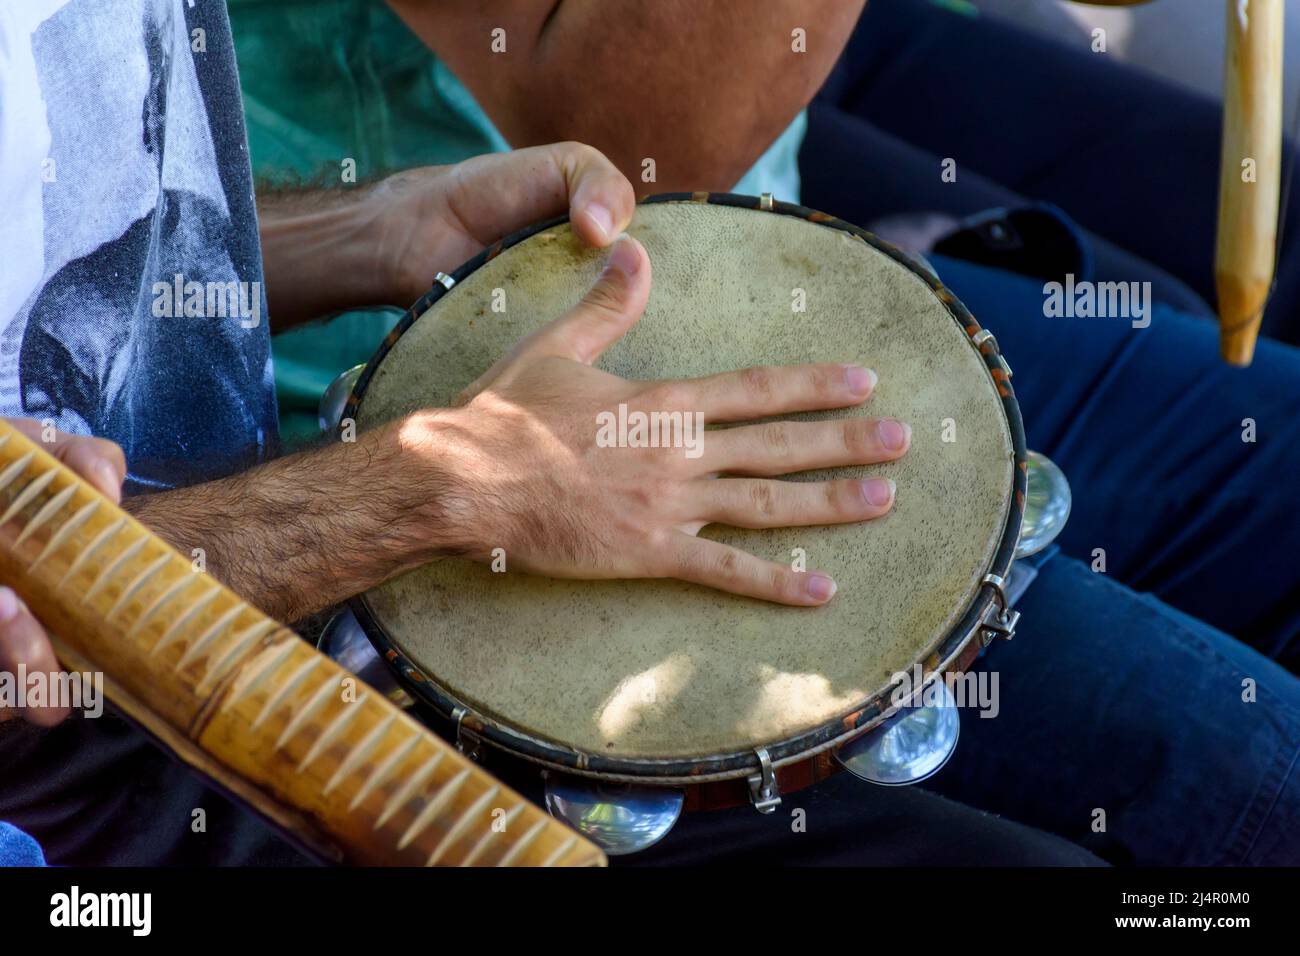 Tambourine player and other instrumentalists during a Brazilian samba performance at the carnival Stock Photo